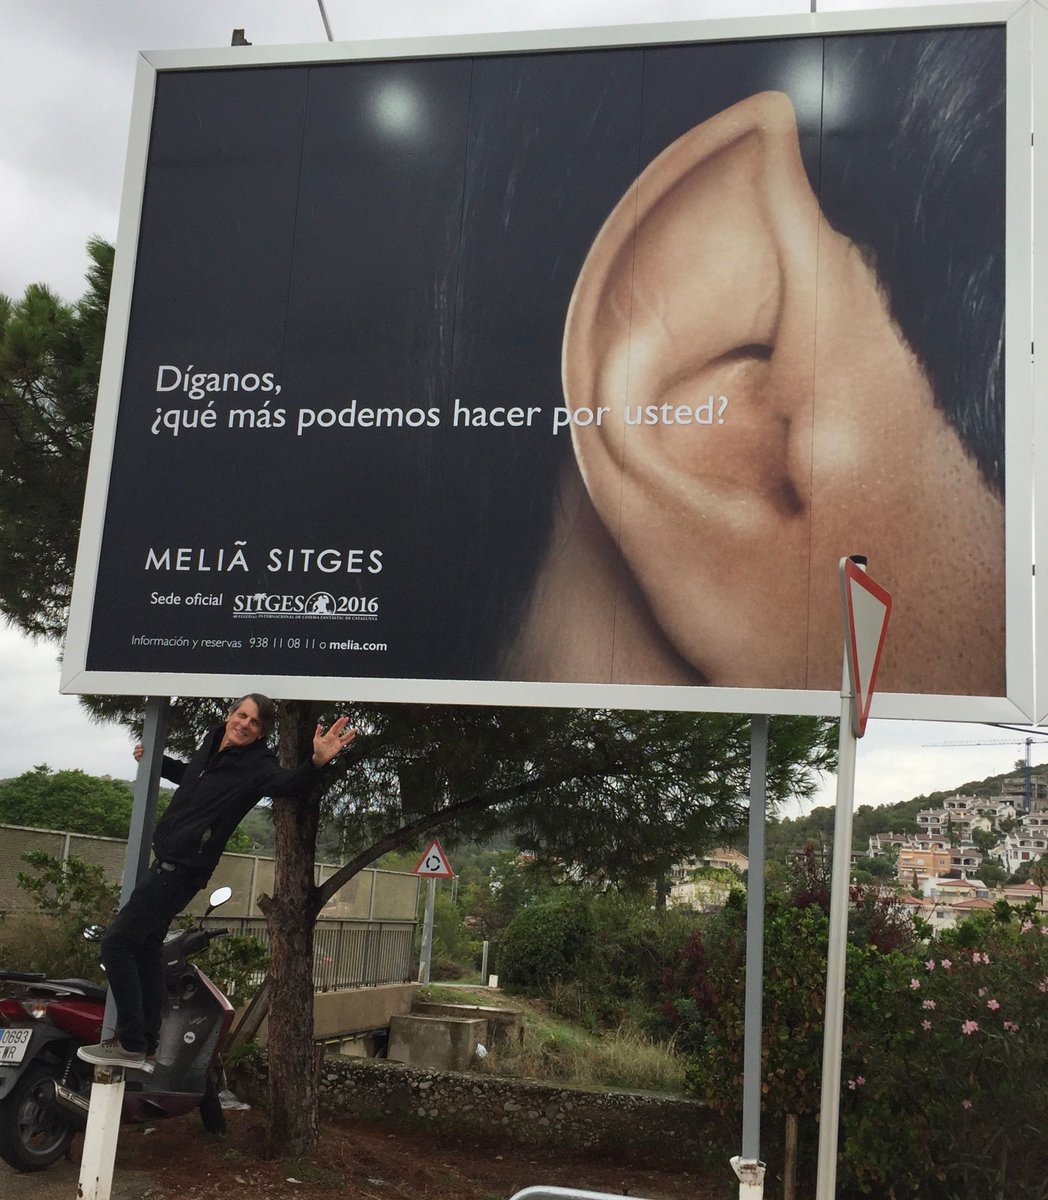 Me and Spock's ear at the film festival in Sitges, Spain where I was screening my documentary For The Love Of Spock in 2016. The translation is: “Tell us what else we can do for you?” I guess it meant they were all ears to comments and suggestions.